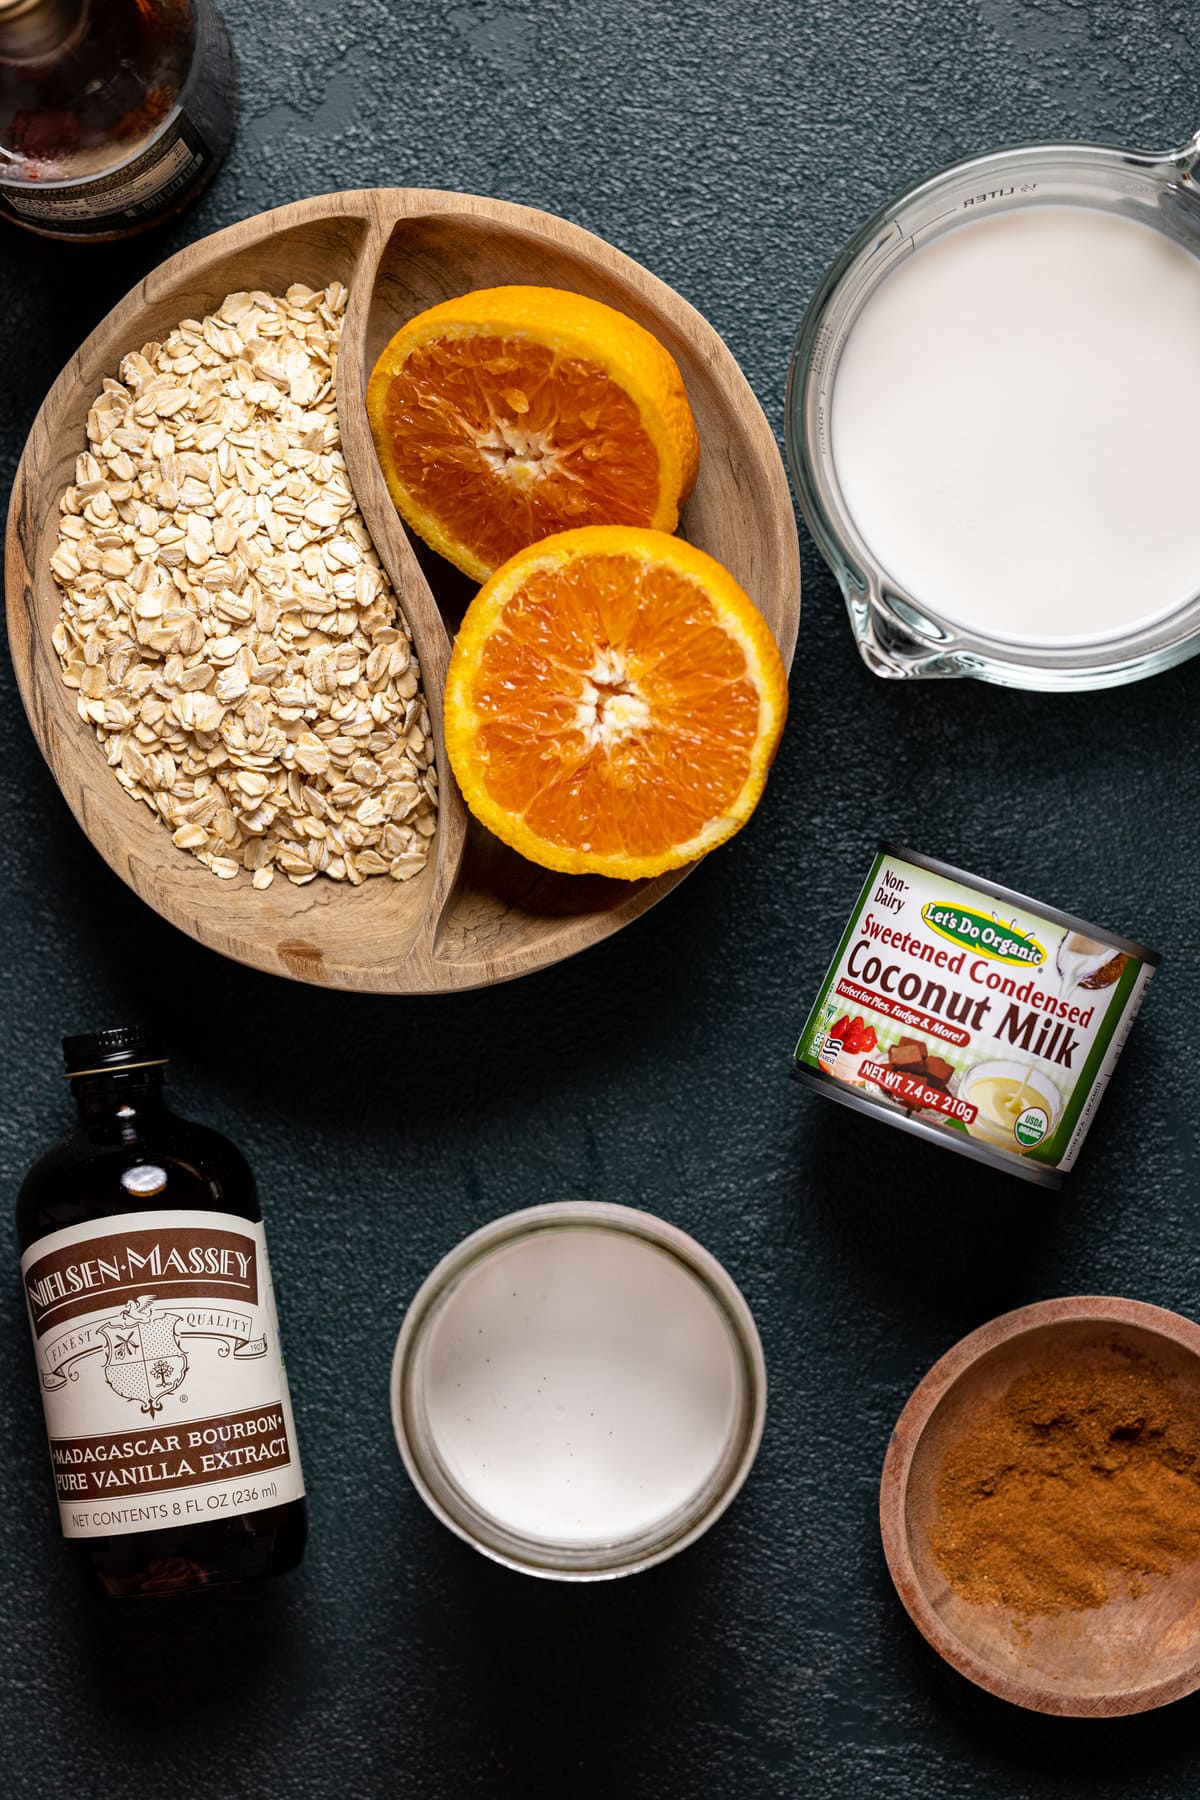 Ingredients for Maple Cinnamon Oatmeal with Roasted Oranges including vanilla extract, sweetened condensed coconut milk, and cinnamon